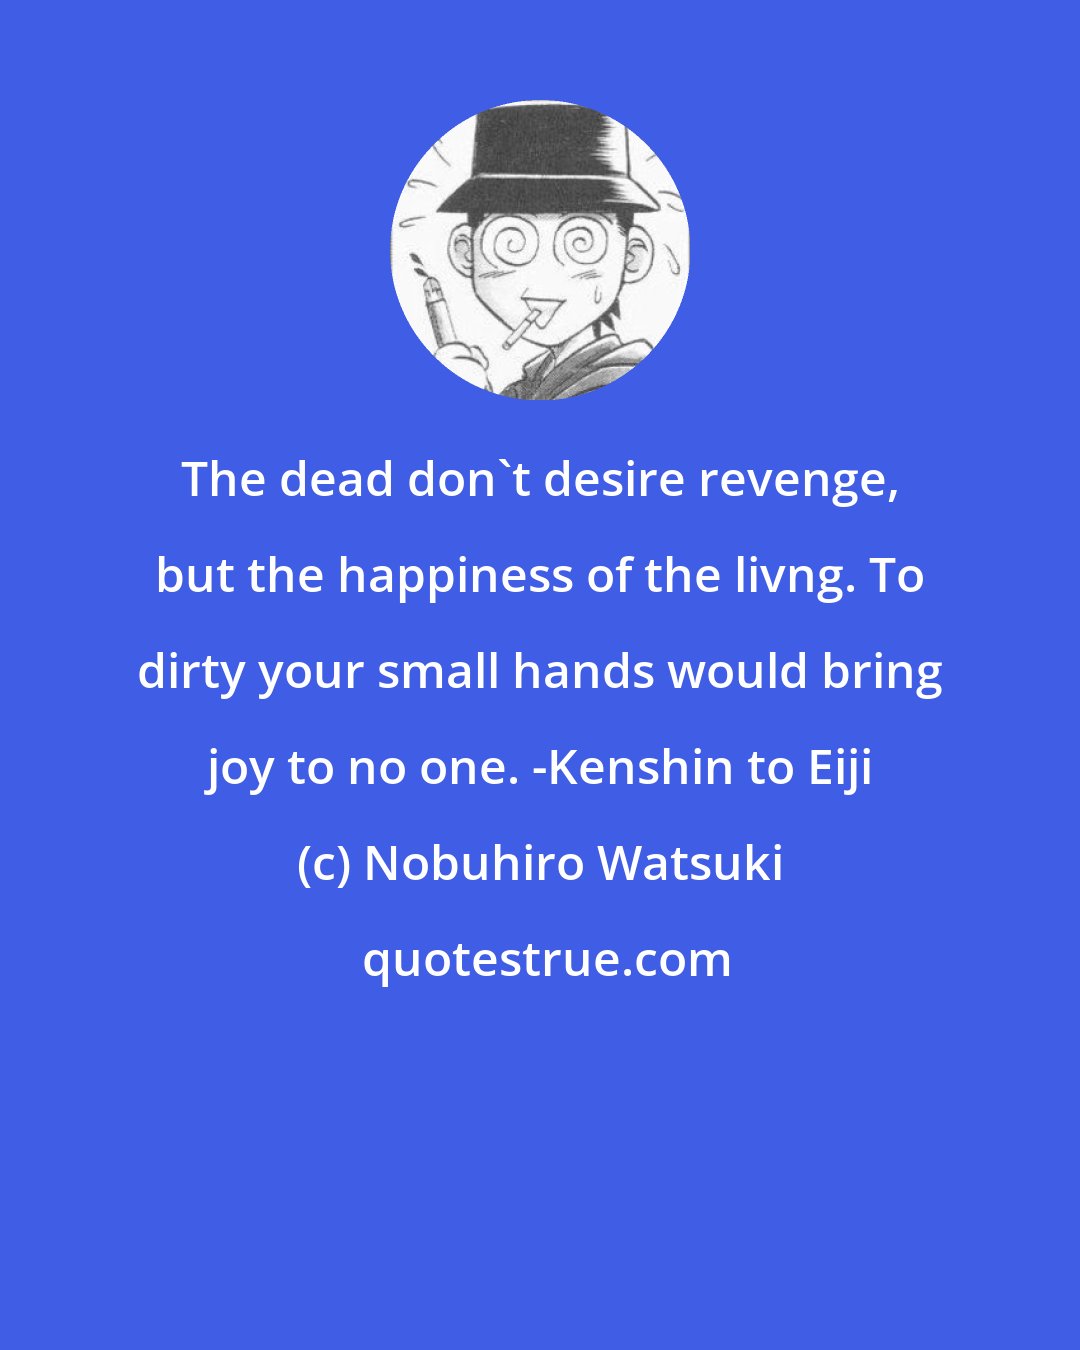 Nobuhiro Watsuki: The dead don't desire revenge, but the happiness of the livng. To dirty your small hands would bring joy to no one. -Kenshin to Eiji